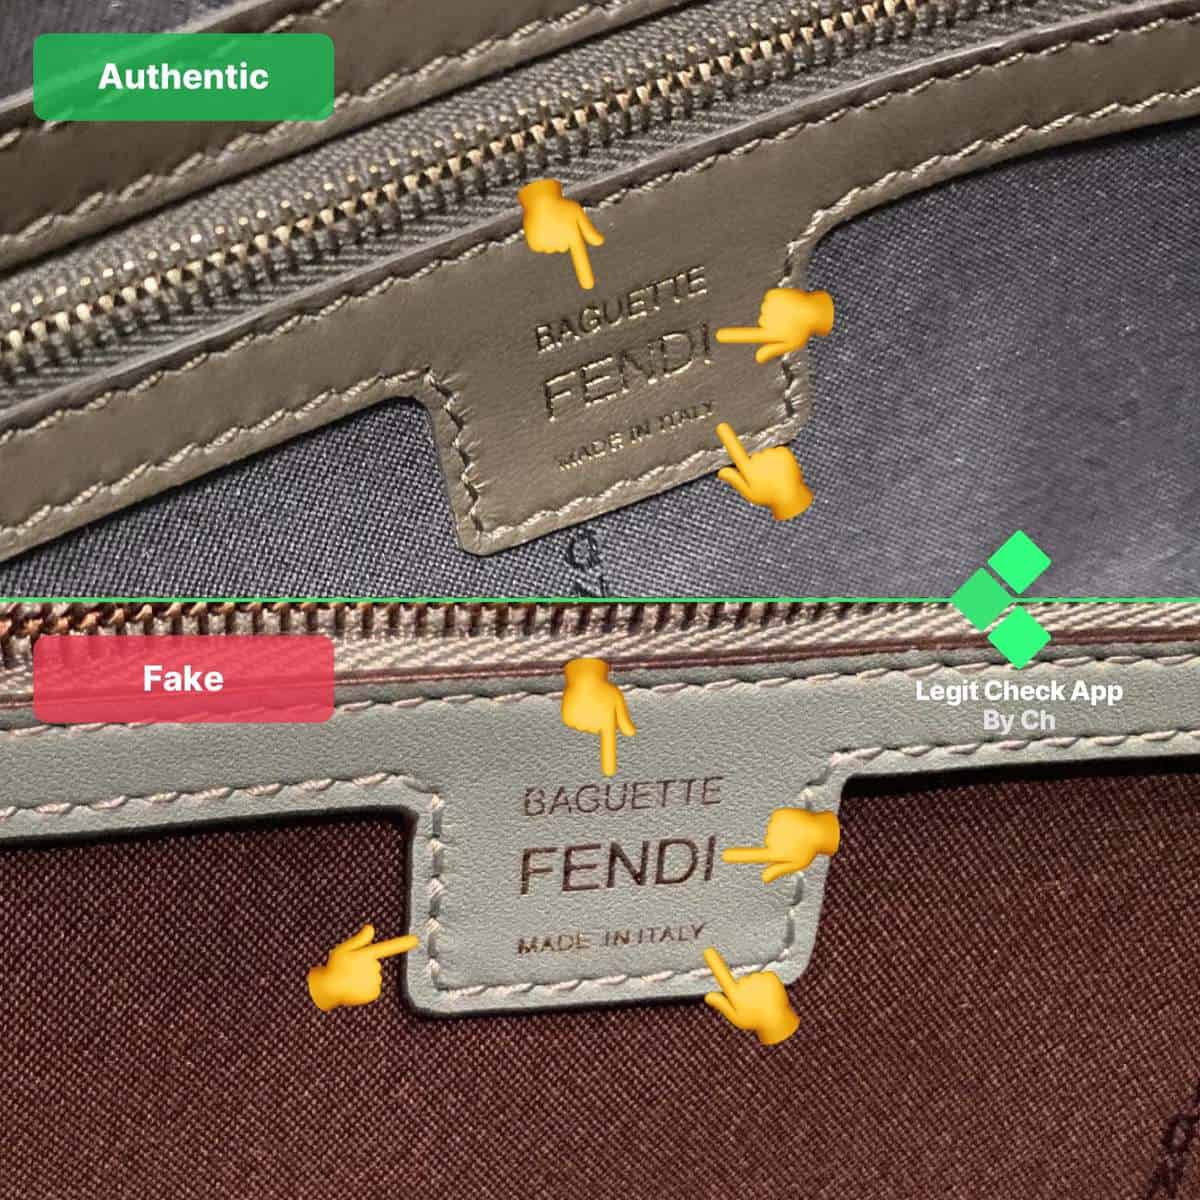 Authenticate This Fendi >> Please read the rules & use the format in post  #1, Page 560